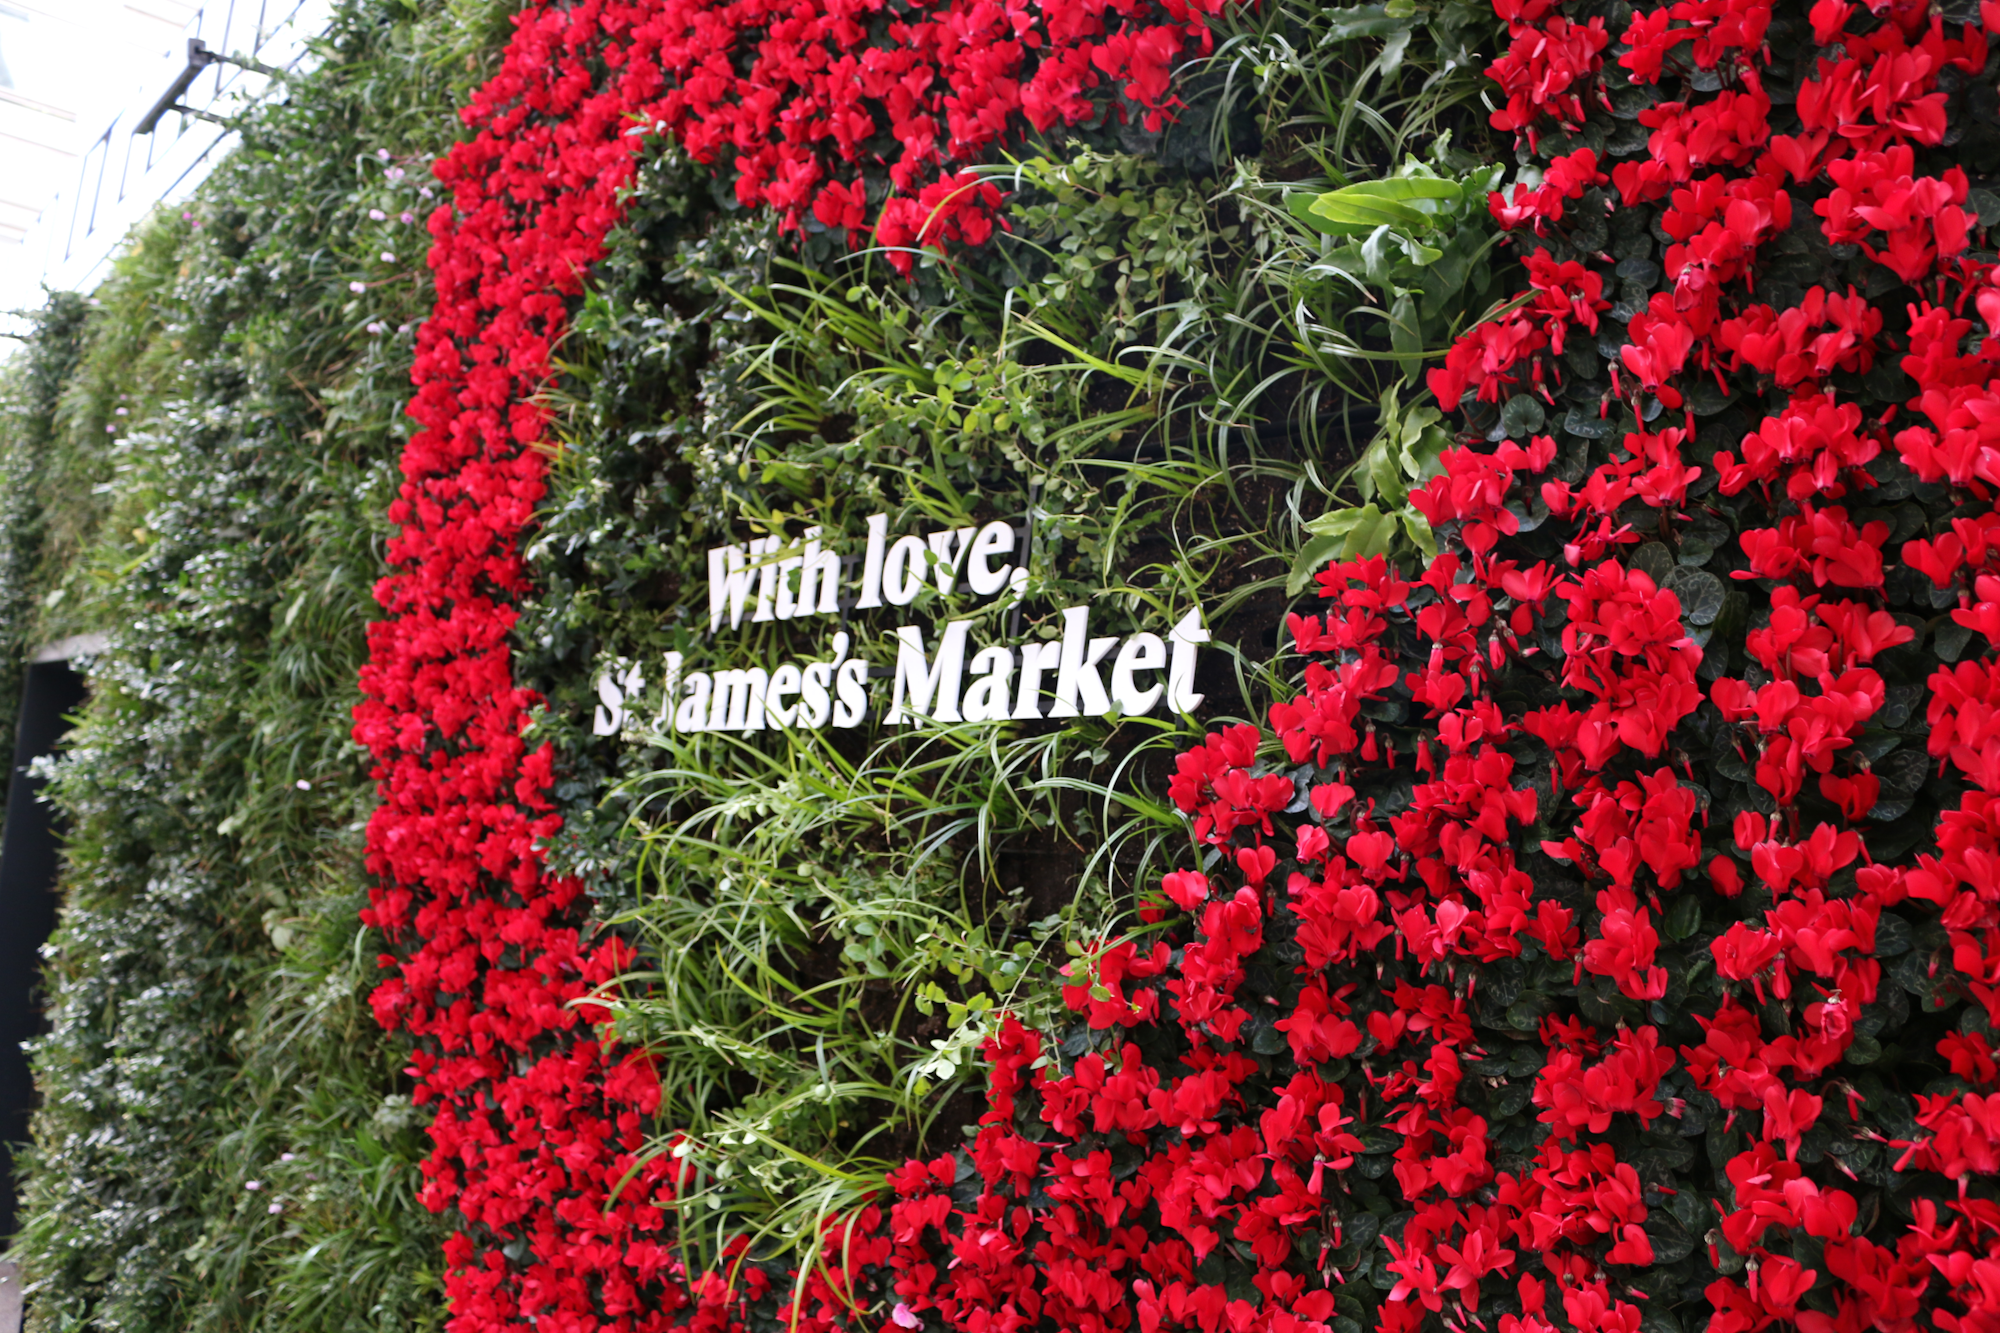 Love Heart In The Living Wall At St James's Market For St Valentine's DayLondon